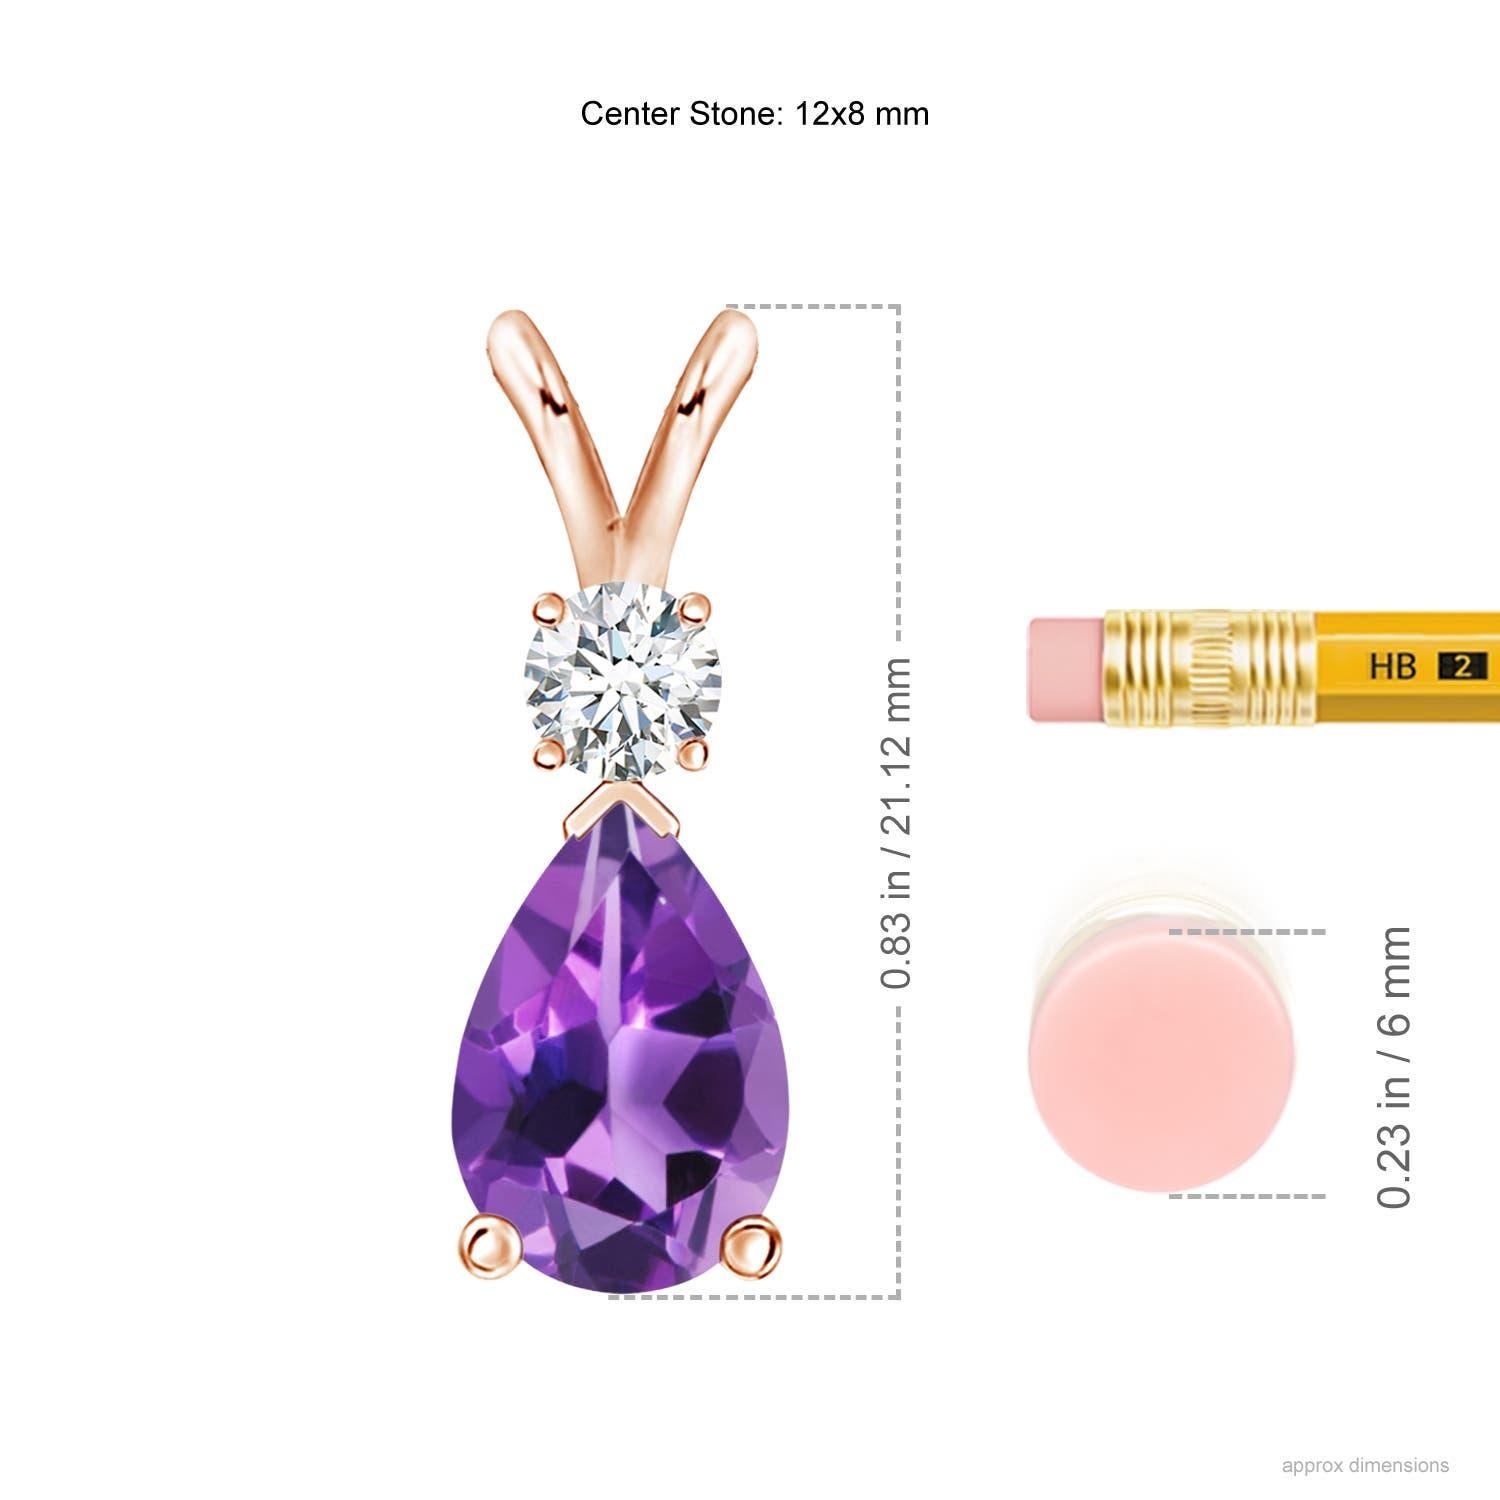 A pear-shaped deep purple amethyst is secured in a prong setting and embellished with a diamond accent on the top. Simple yet stunning, this teardrop amethyst pendant with V bale is sculpted in 14k rose gold.
Amethyst is the Birthstone for February